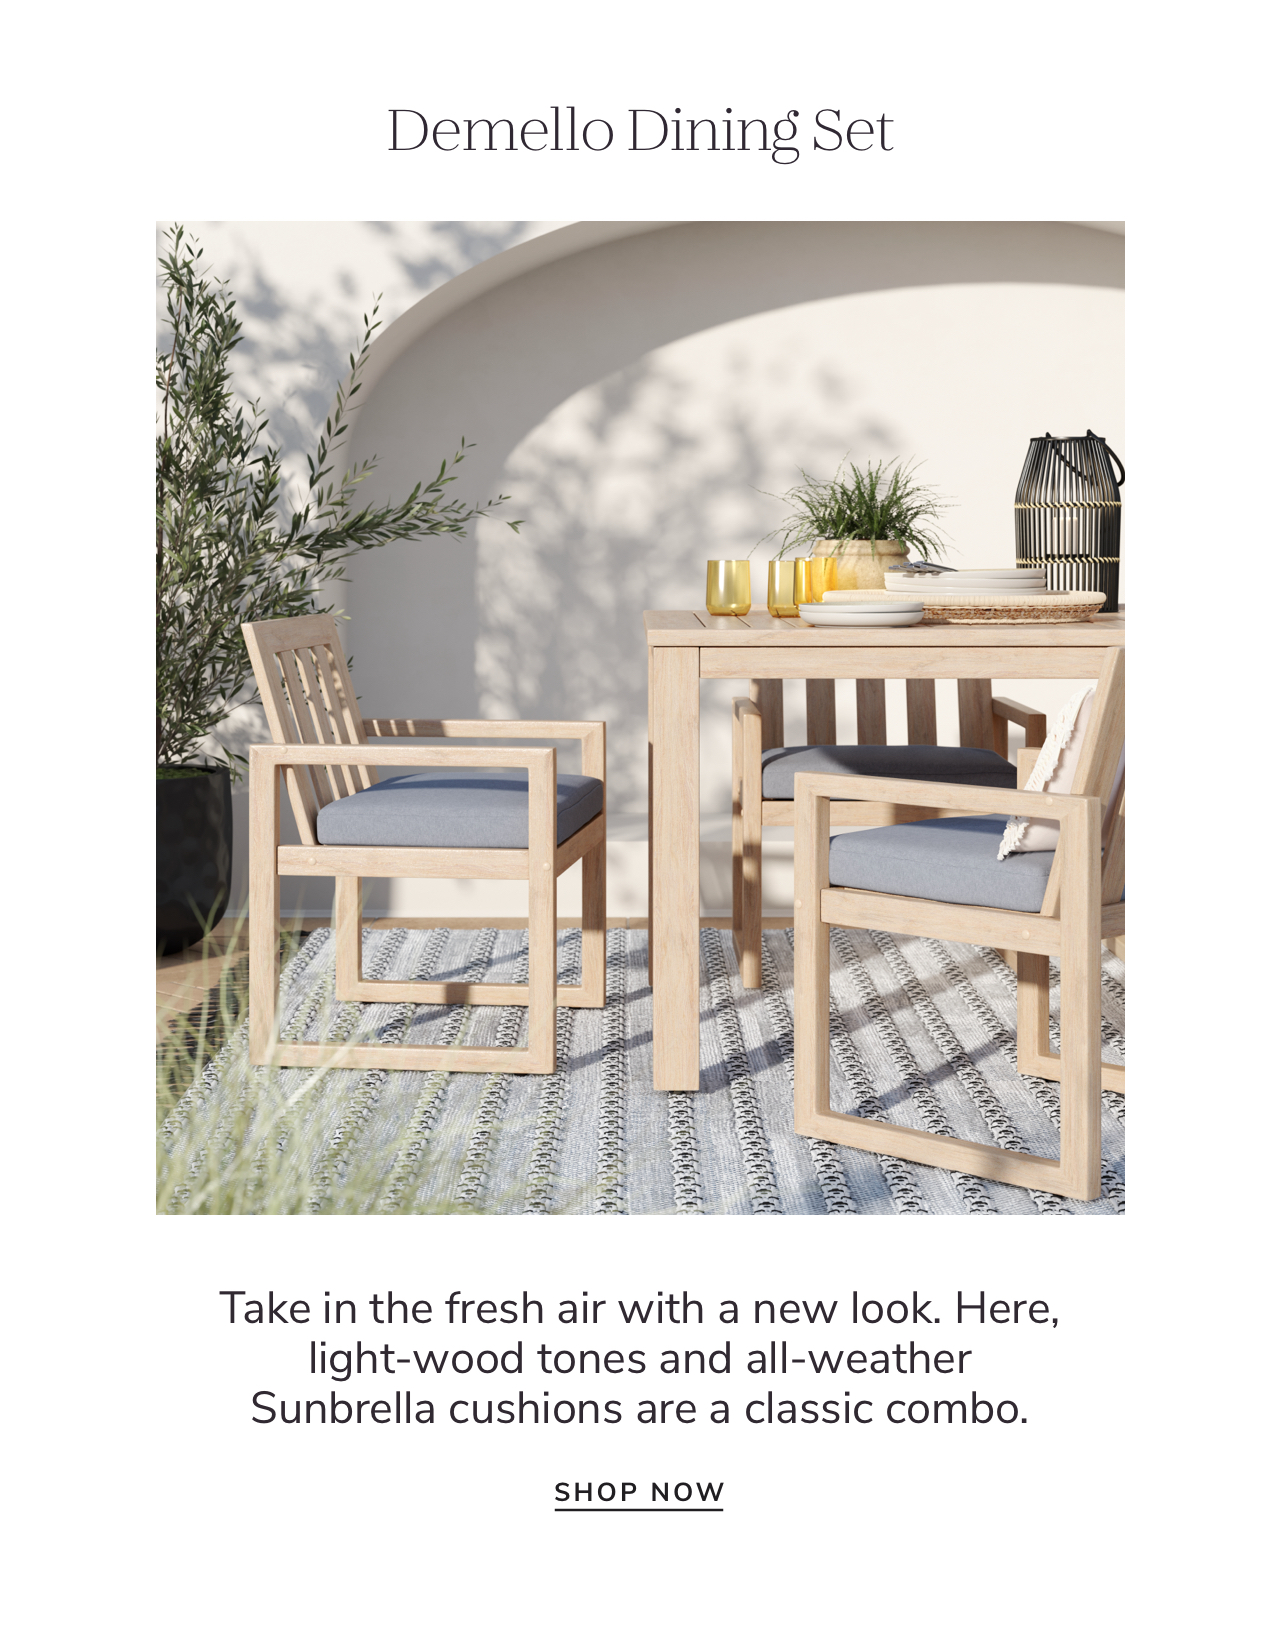 Demello Dining Set Take in the fresh air with a new look. Here, light-wood tones and all-weather Sunbrella cushions are a classic combo. SHOP NOW 